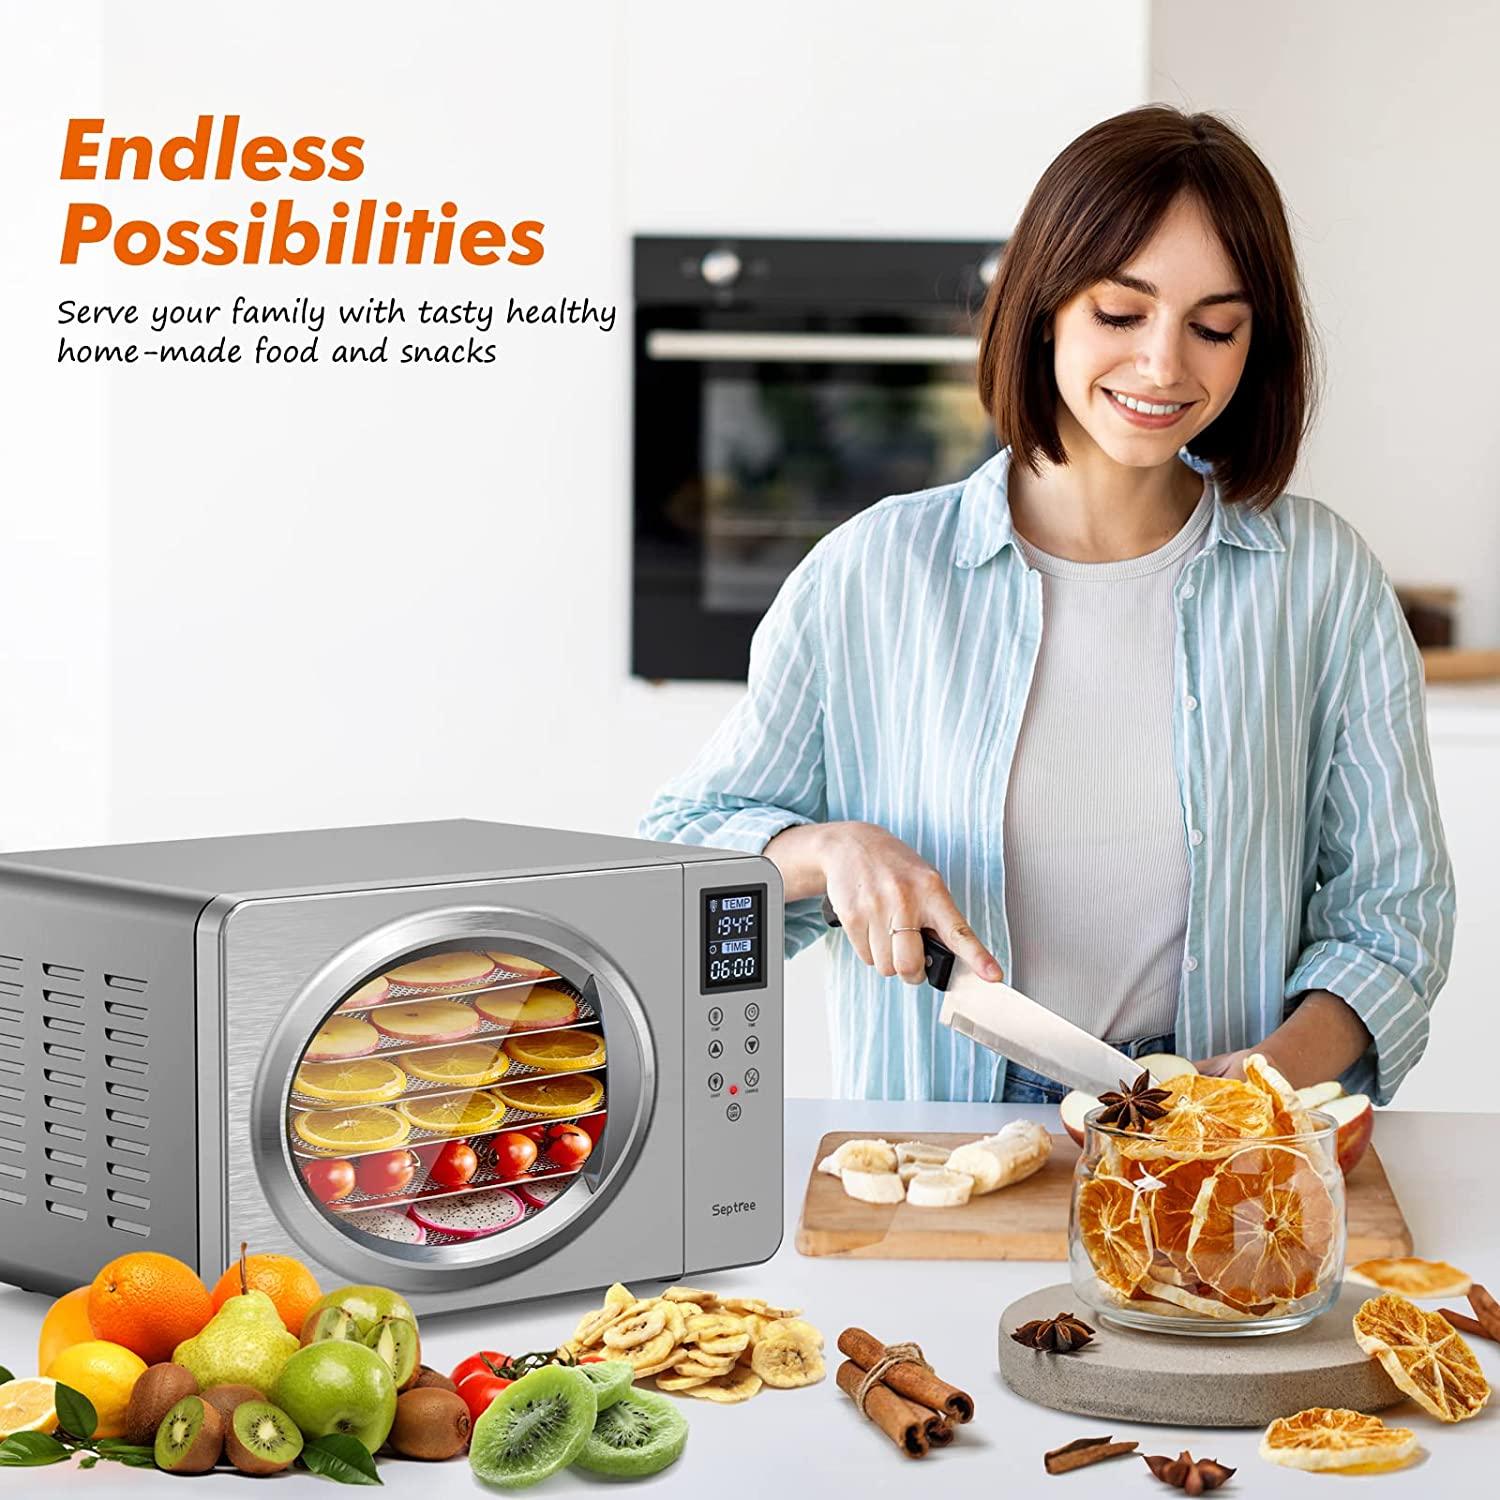 Fruit dryer, Stainless Steel Food Dehydrator with Large Capacity  Intelligent Temperature and Time Control with Powerful Drying Capacity for  Fruits